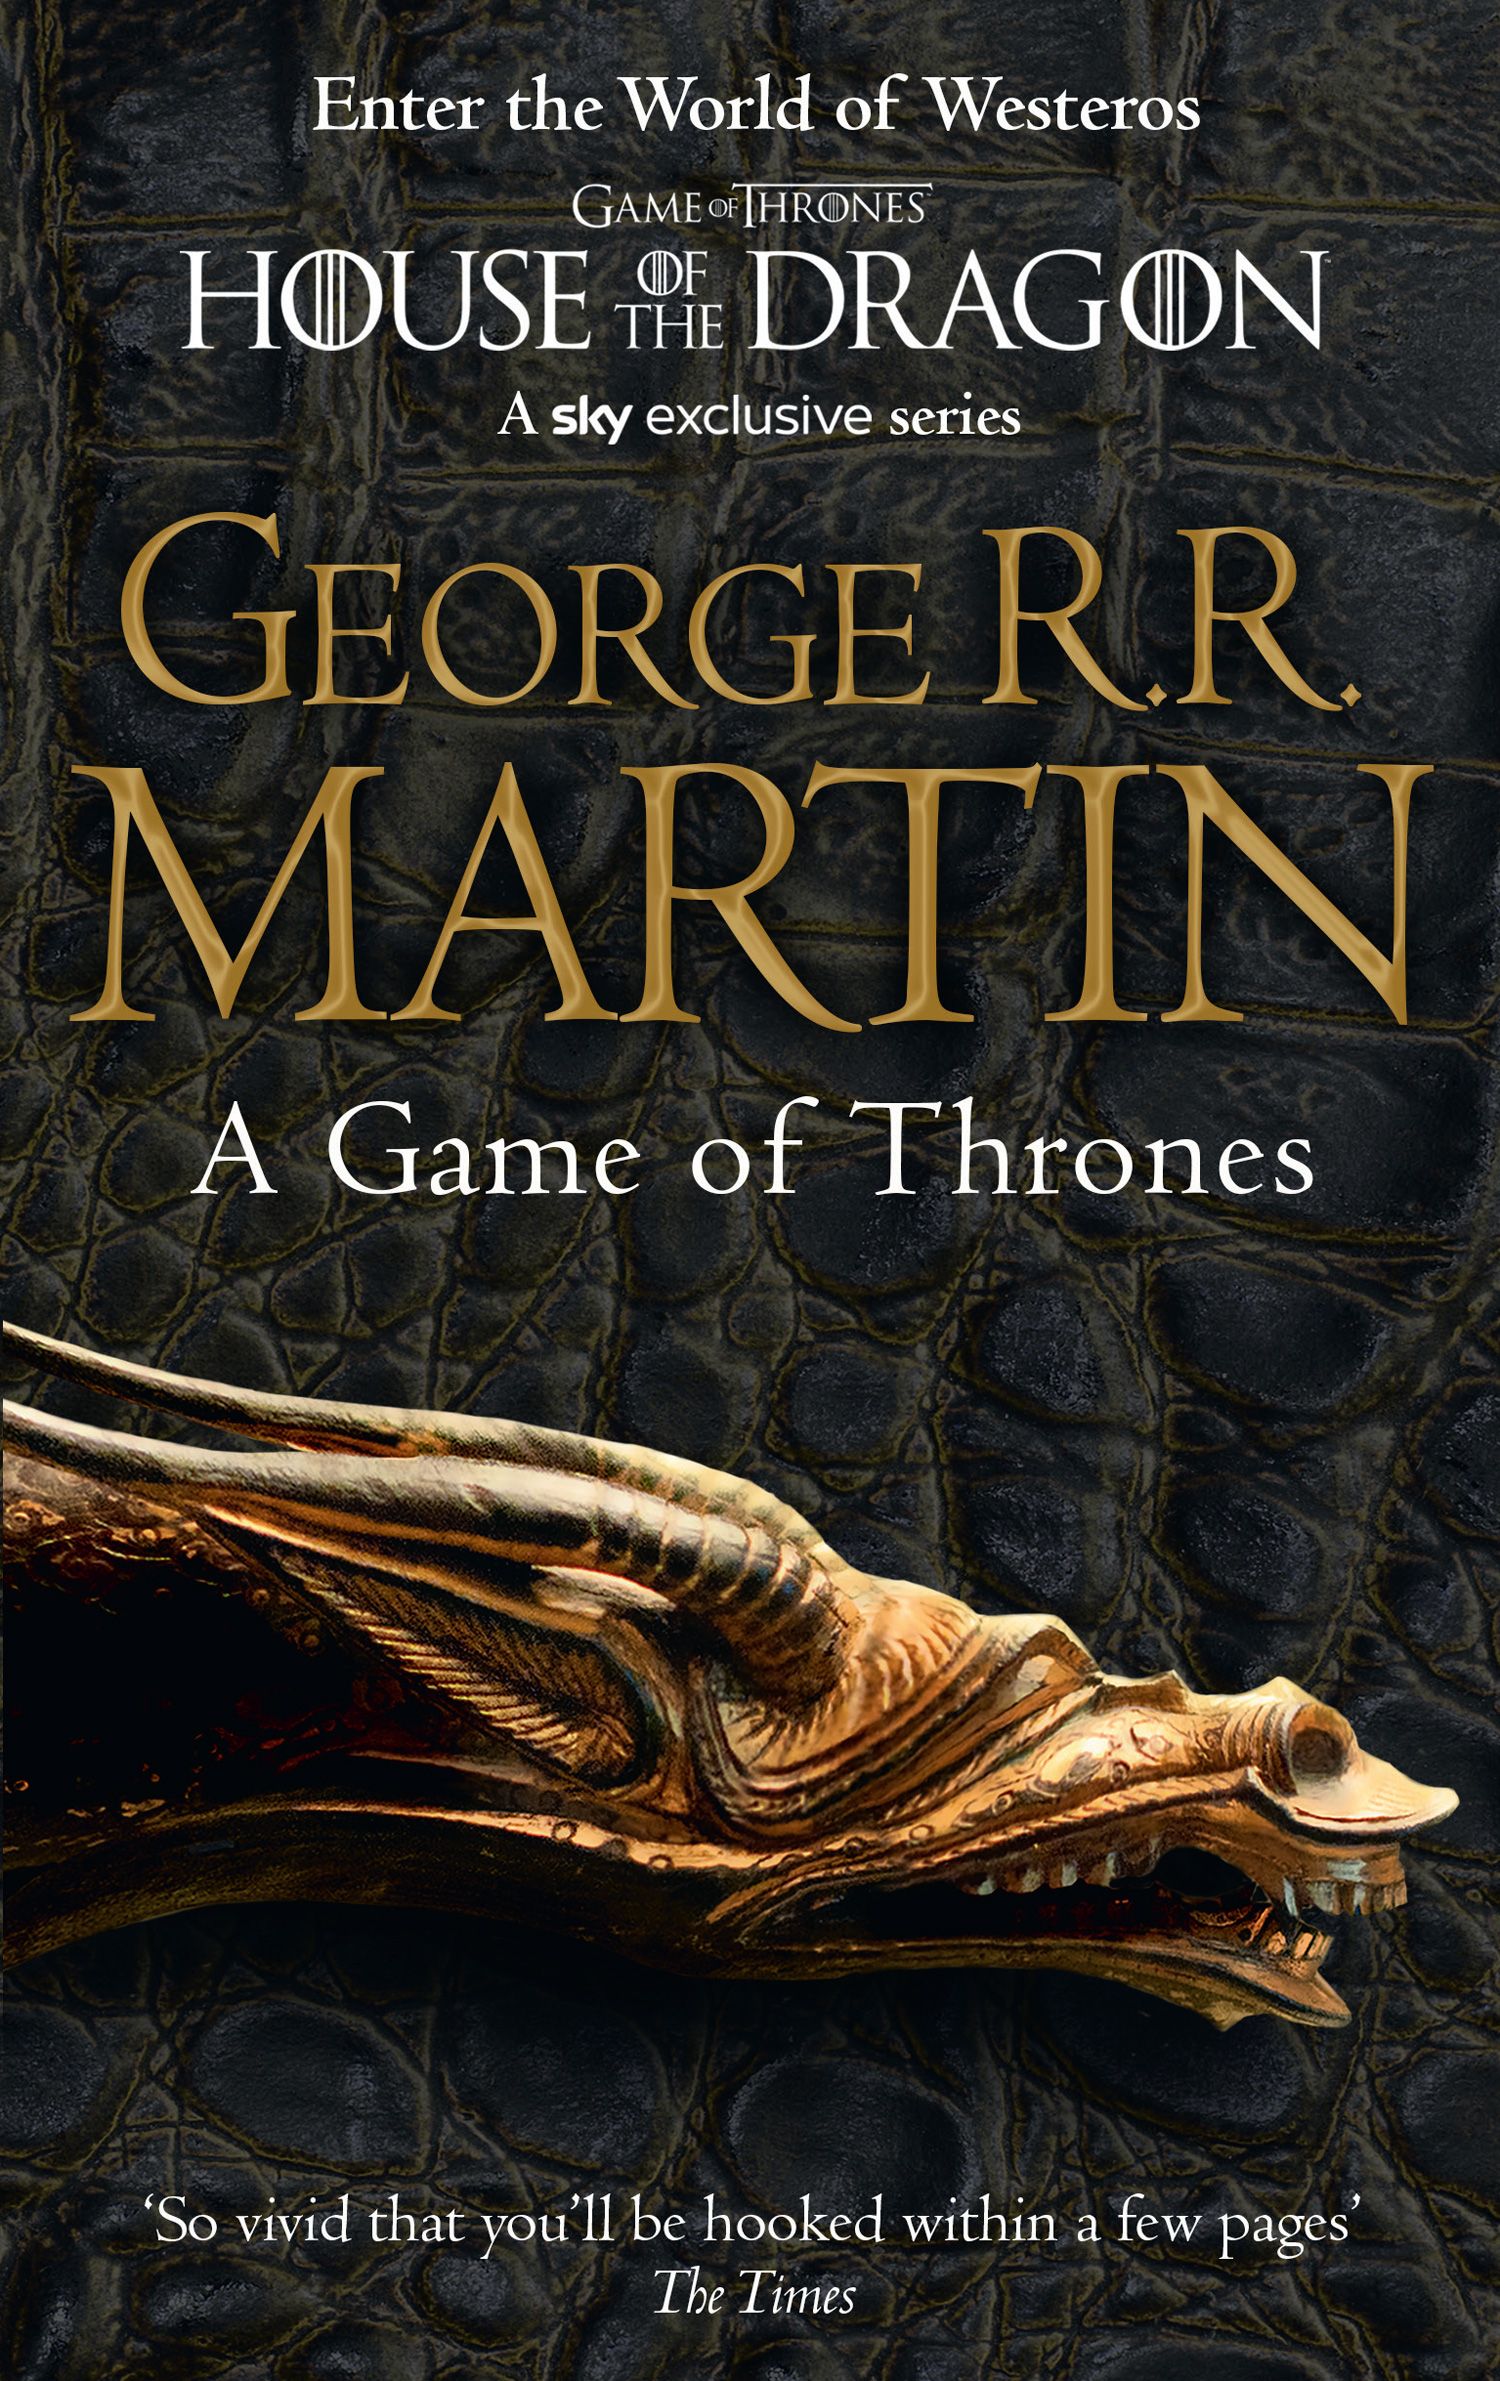 Game of Thrones. A Song of Ice and Fire Series: Book 1 | Gifts for Dad 